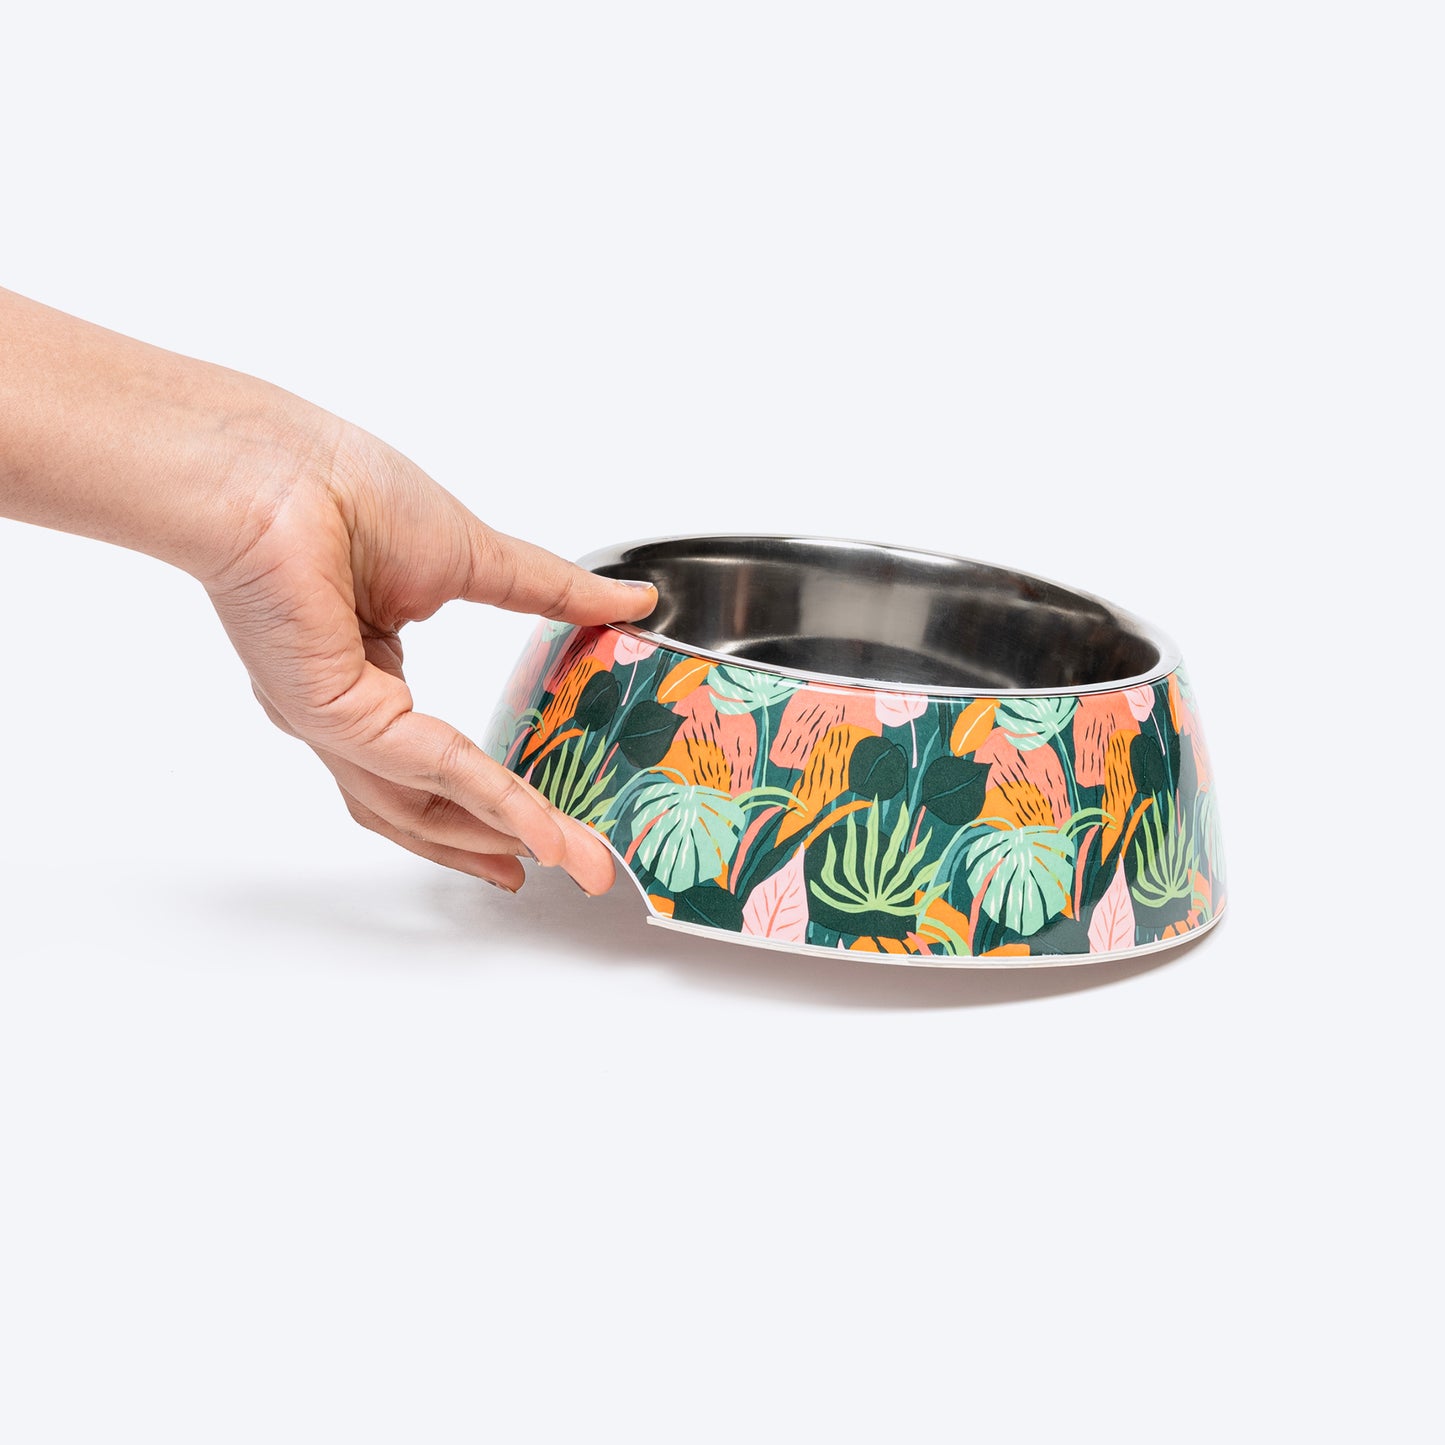 HUFT Garden of Love Printed Melamine Bowl for Dogs - Green - Heads Up For Tails